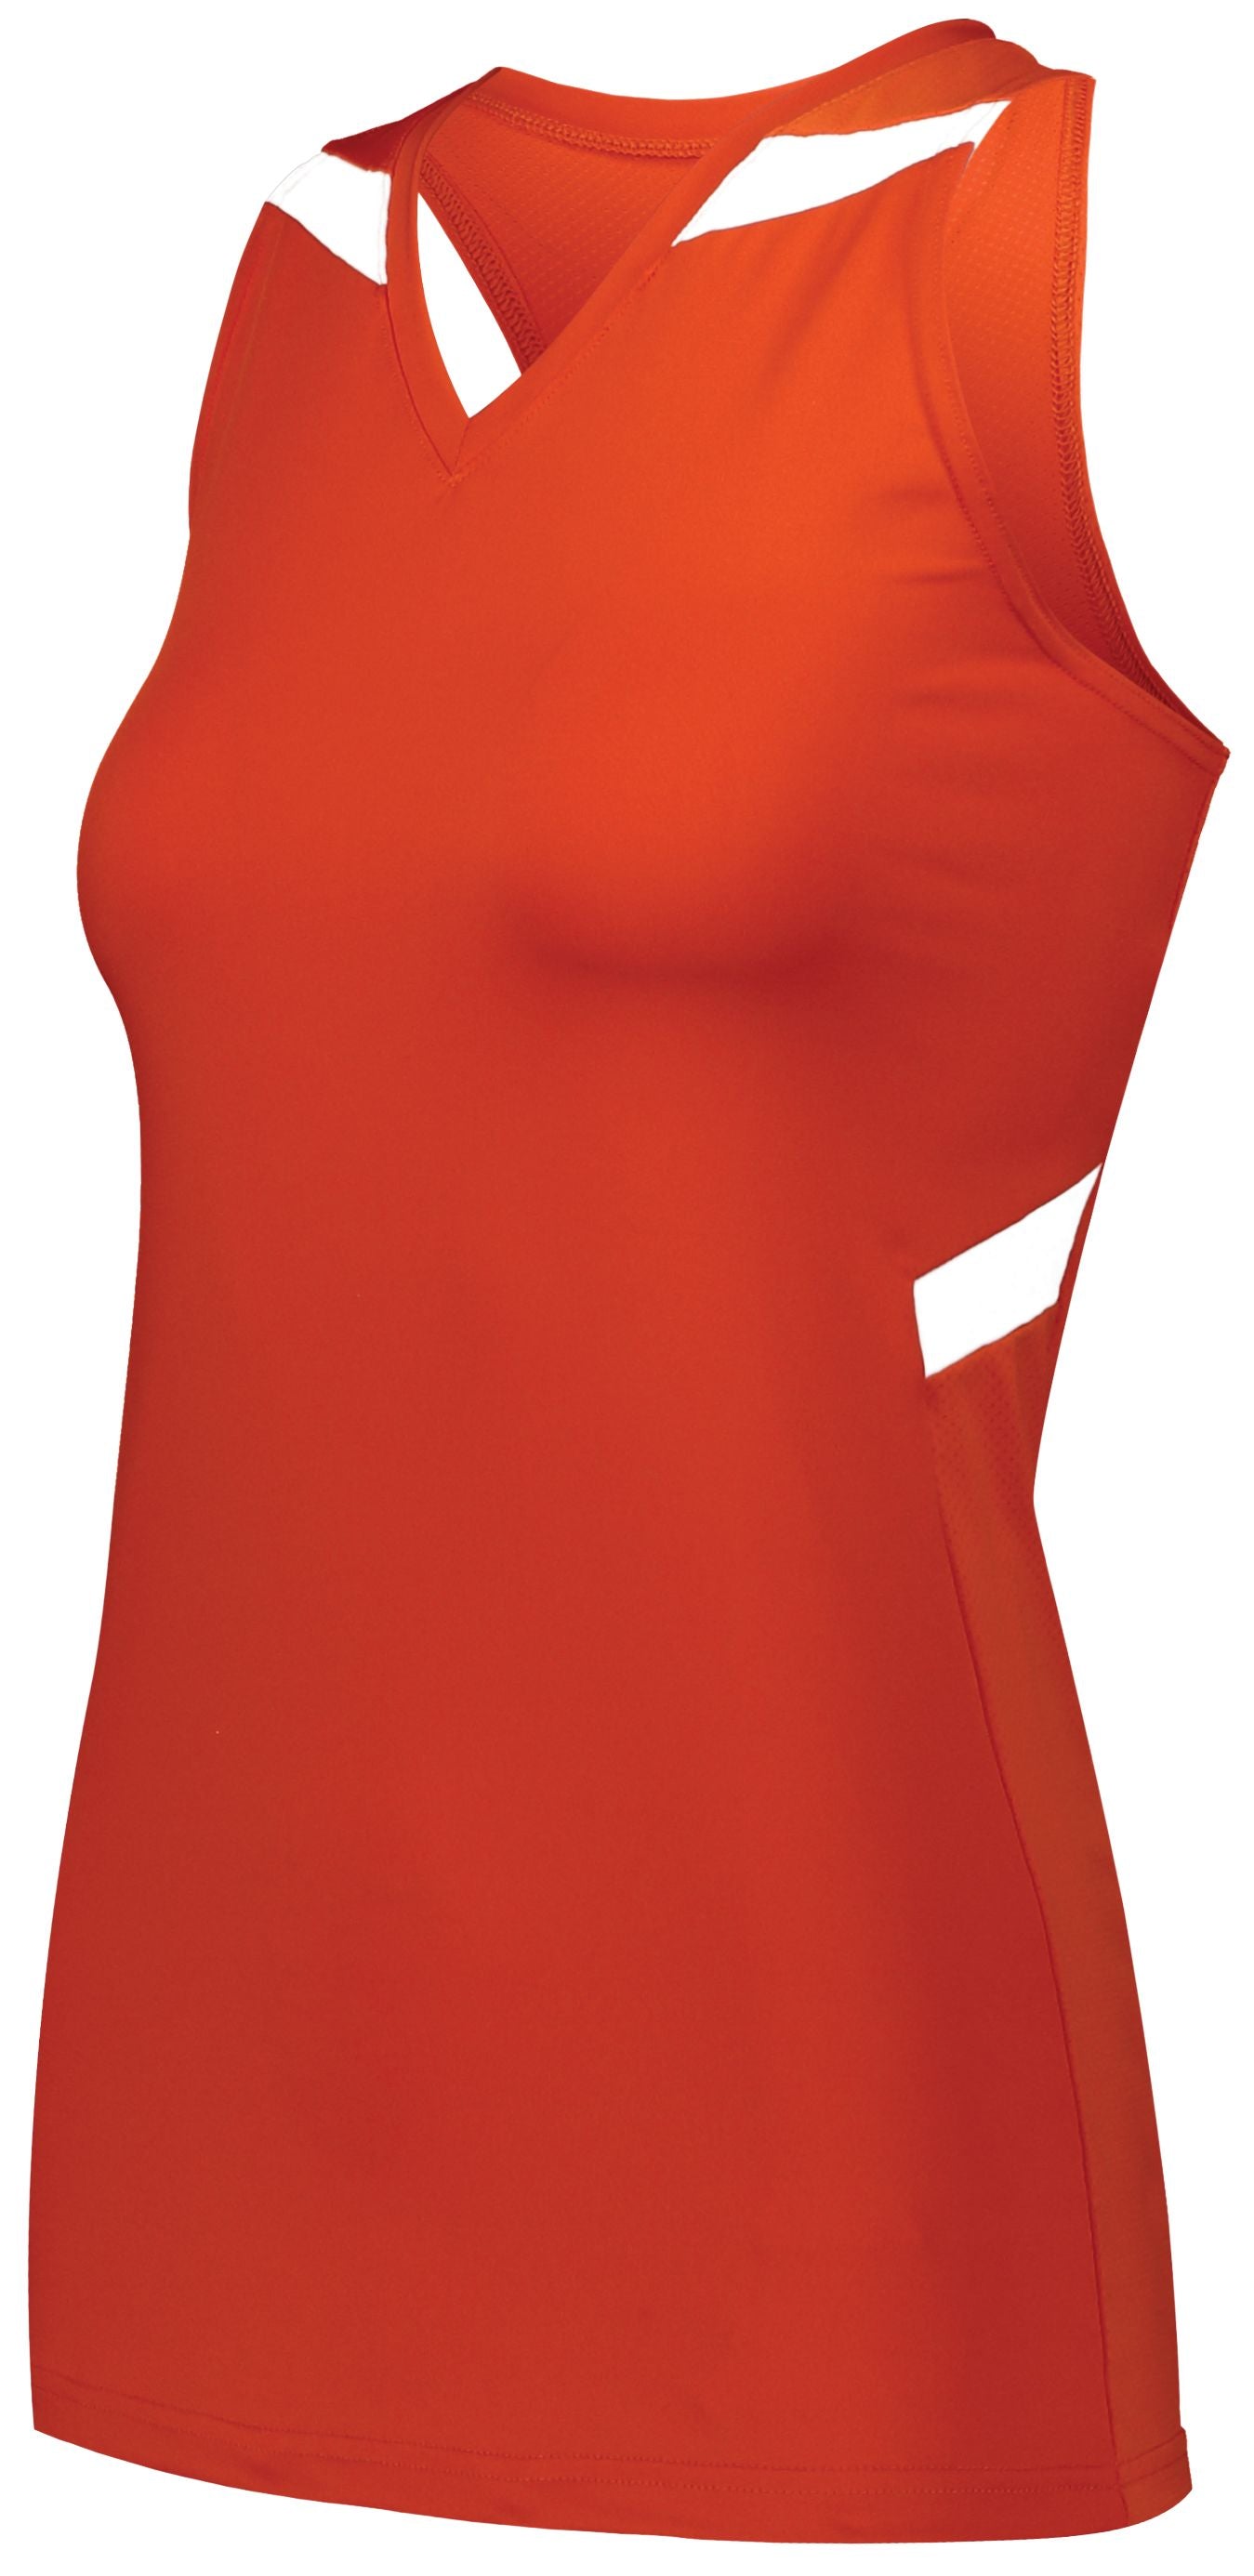 Holloway Ladies Pr Max Compression Jersey in Orange/White  -Part of the Ladies, Ladies-Jersey, Track-Field, Holloway, Shirts product lines at KanaleyCreations.com